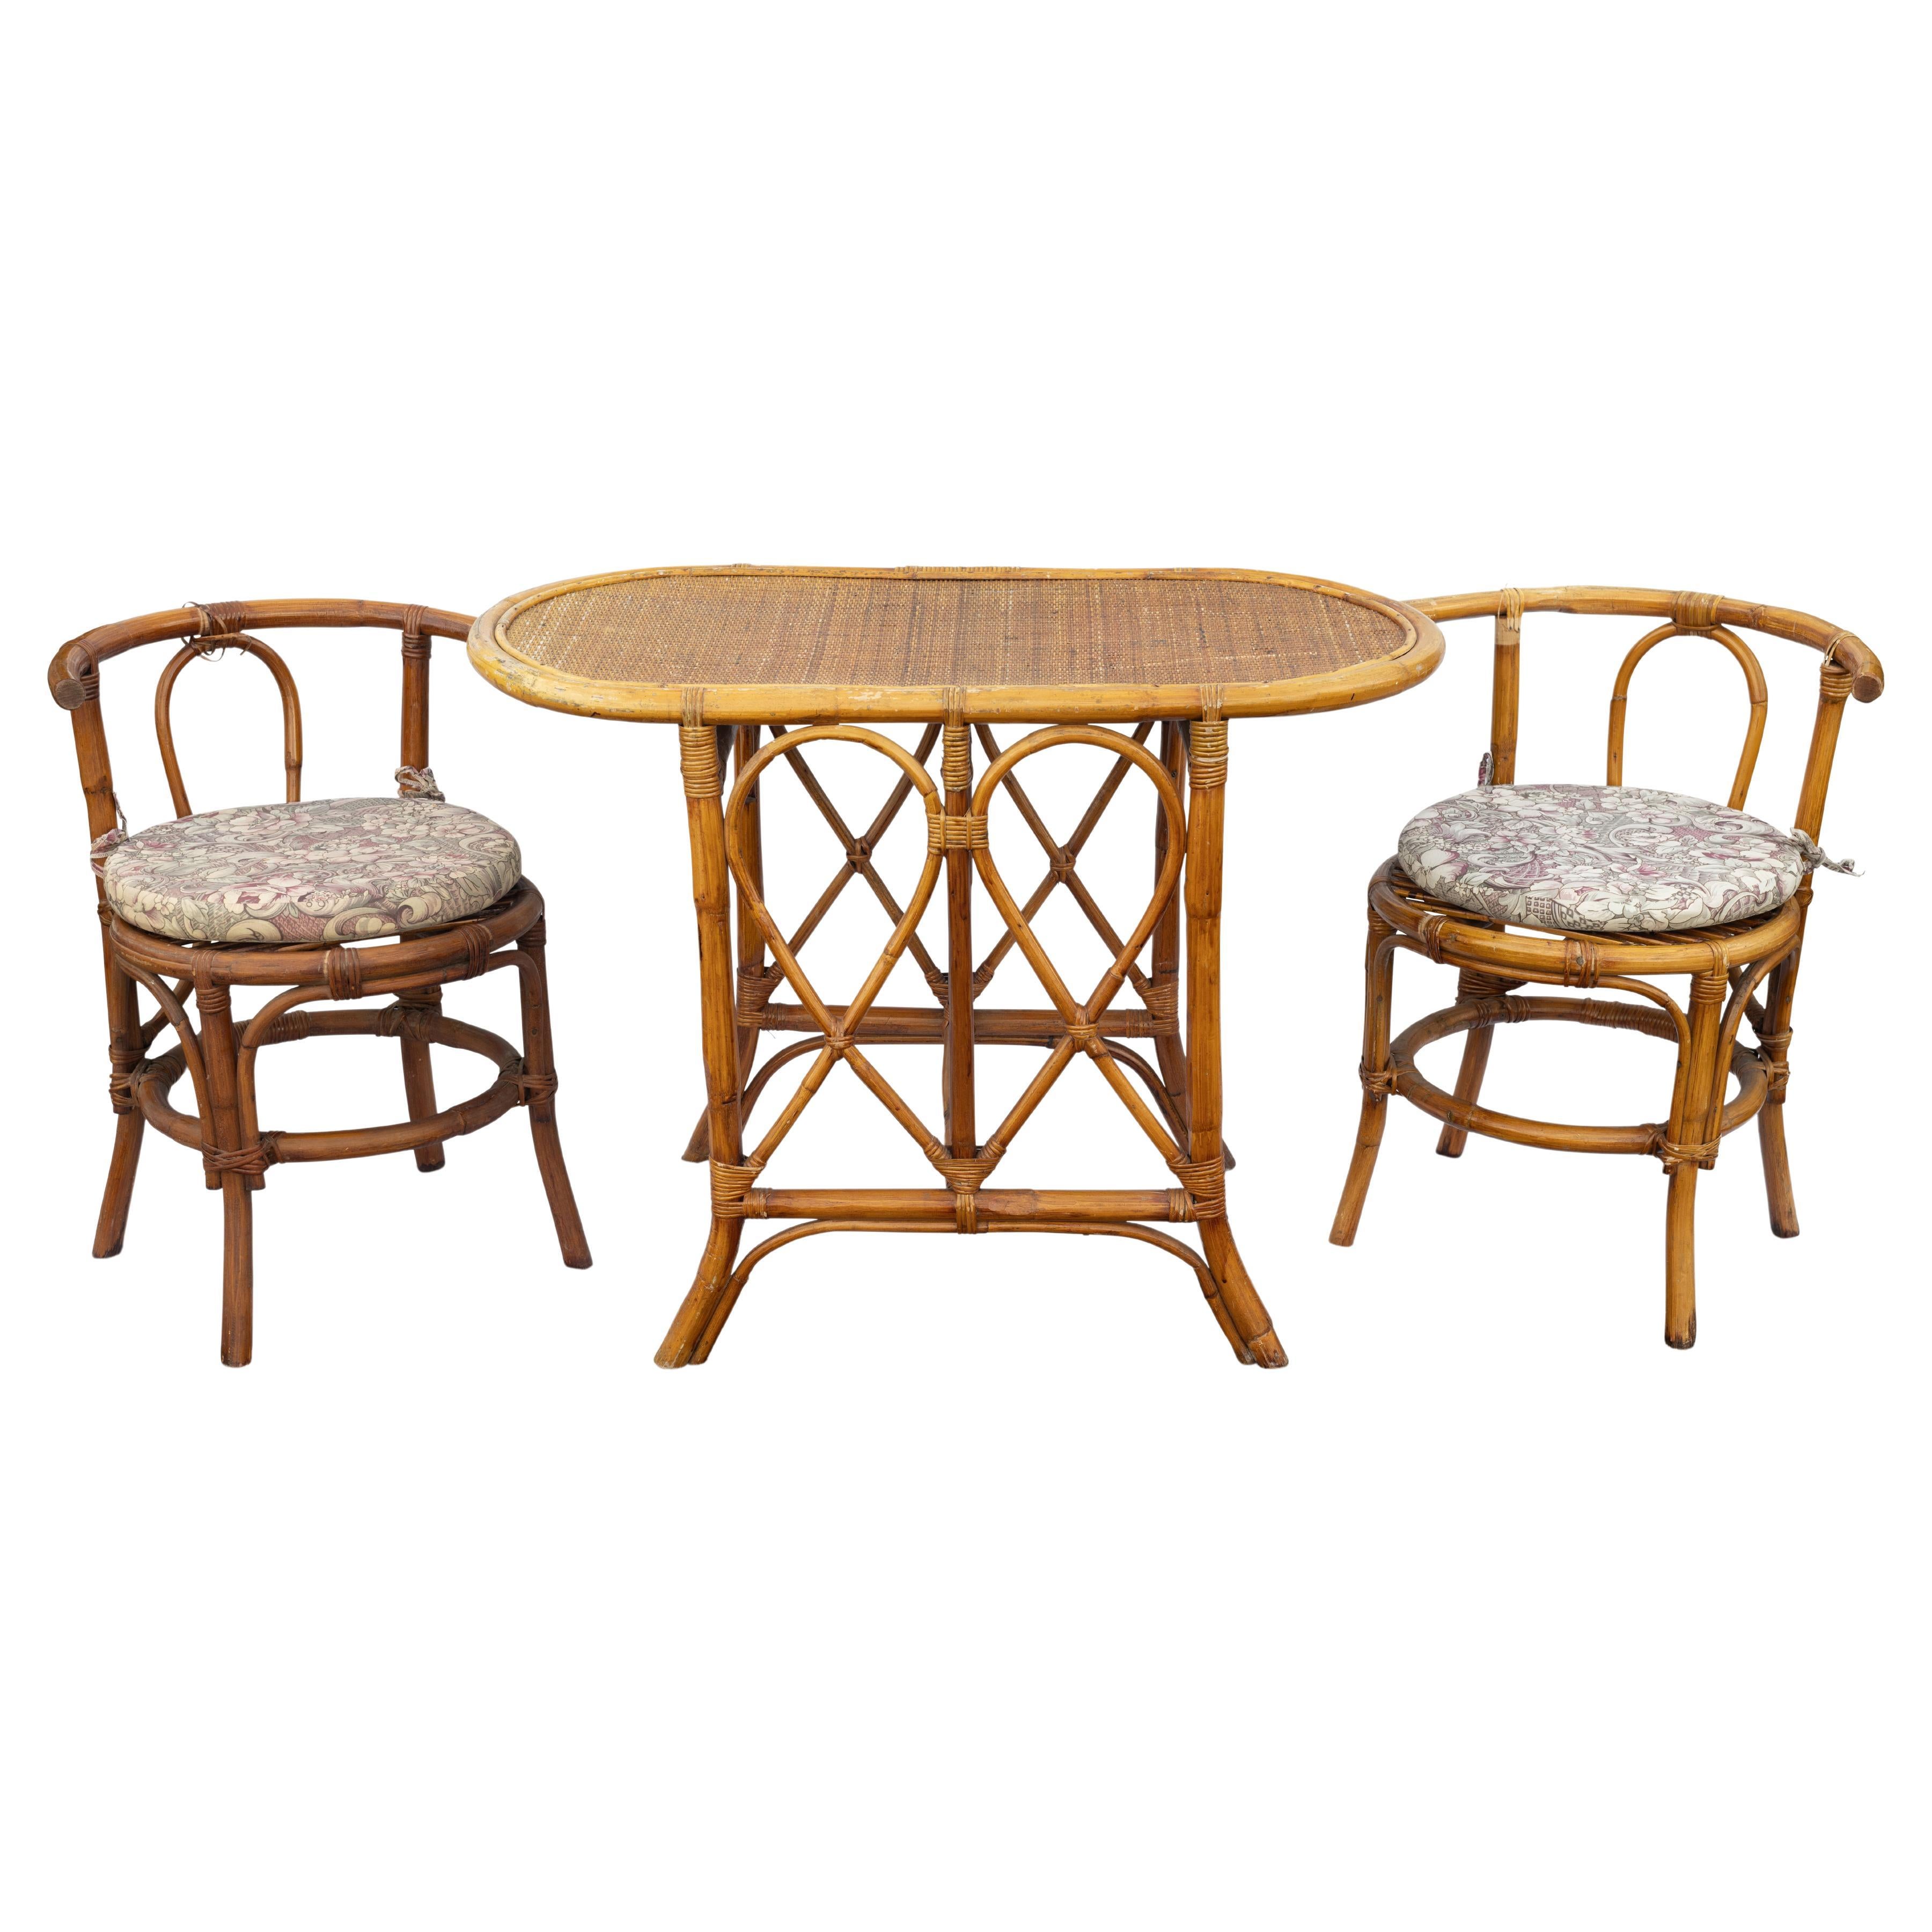 Bohemian Curved Bamboo & Cane Three Piece Dining Set from Italy, 1950s For Sale